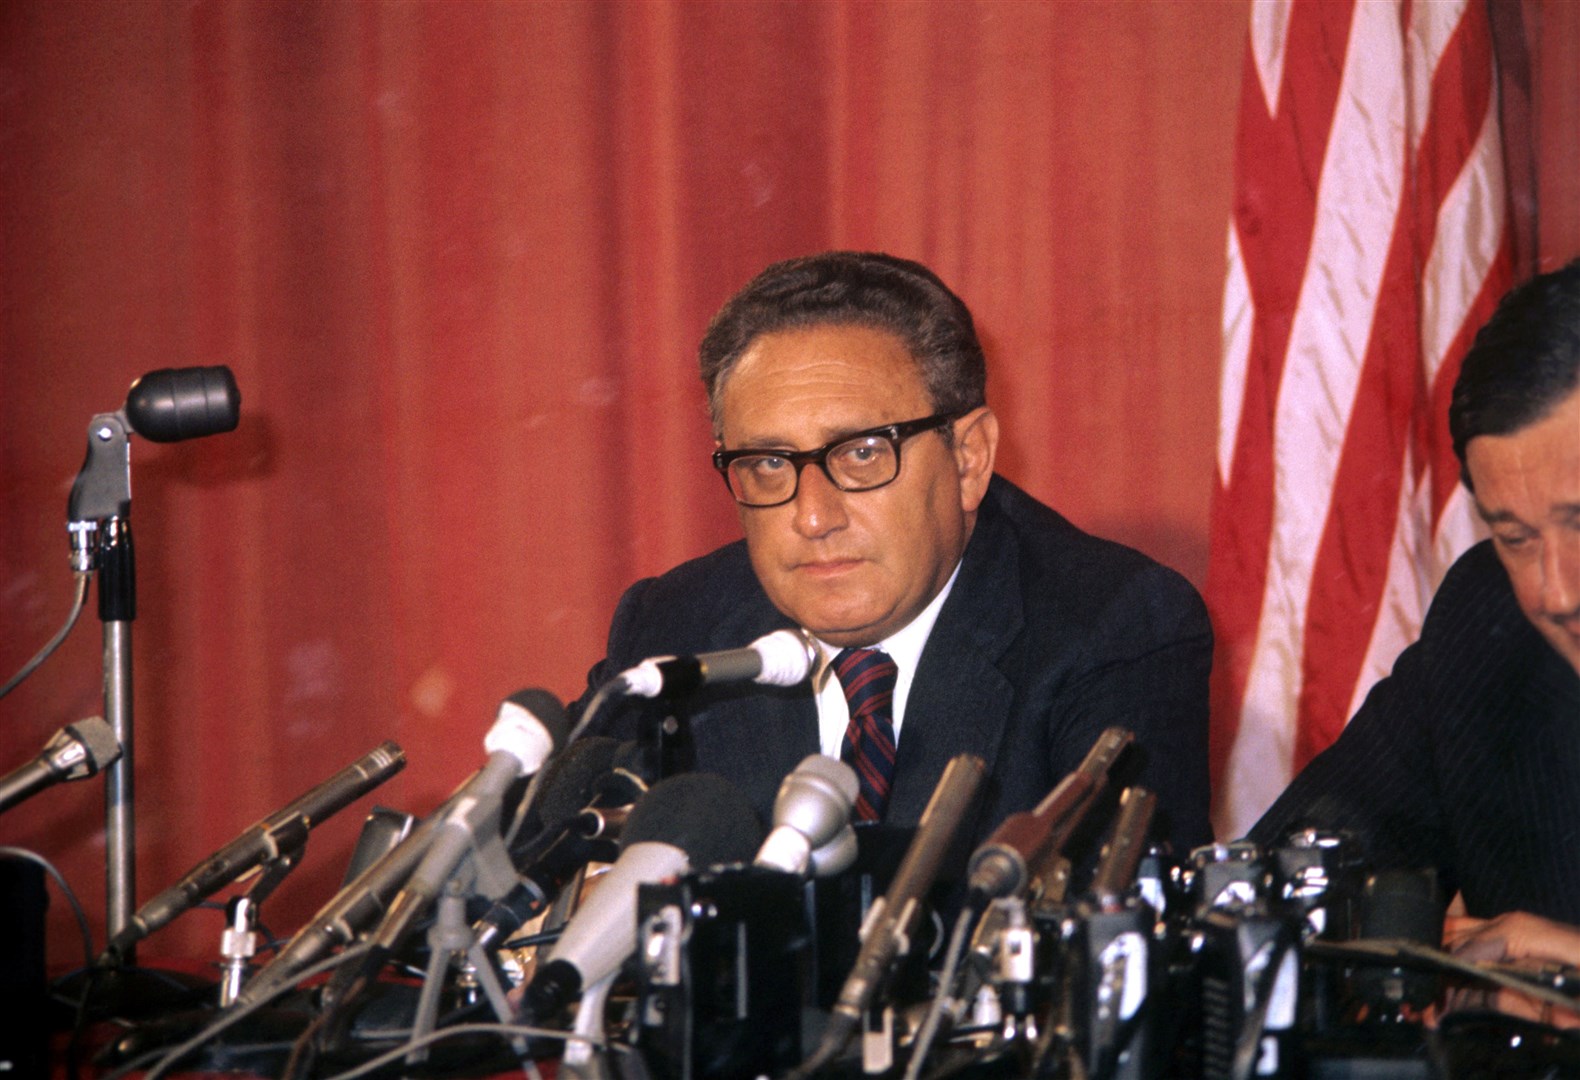 Mr Kissinger with former foreign secretary Anthony Crosland during a press conference on what was referred to at the time as the Rhodesia crisis at the American Embassy in London in September 1976 (PA)